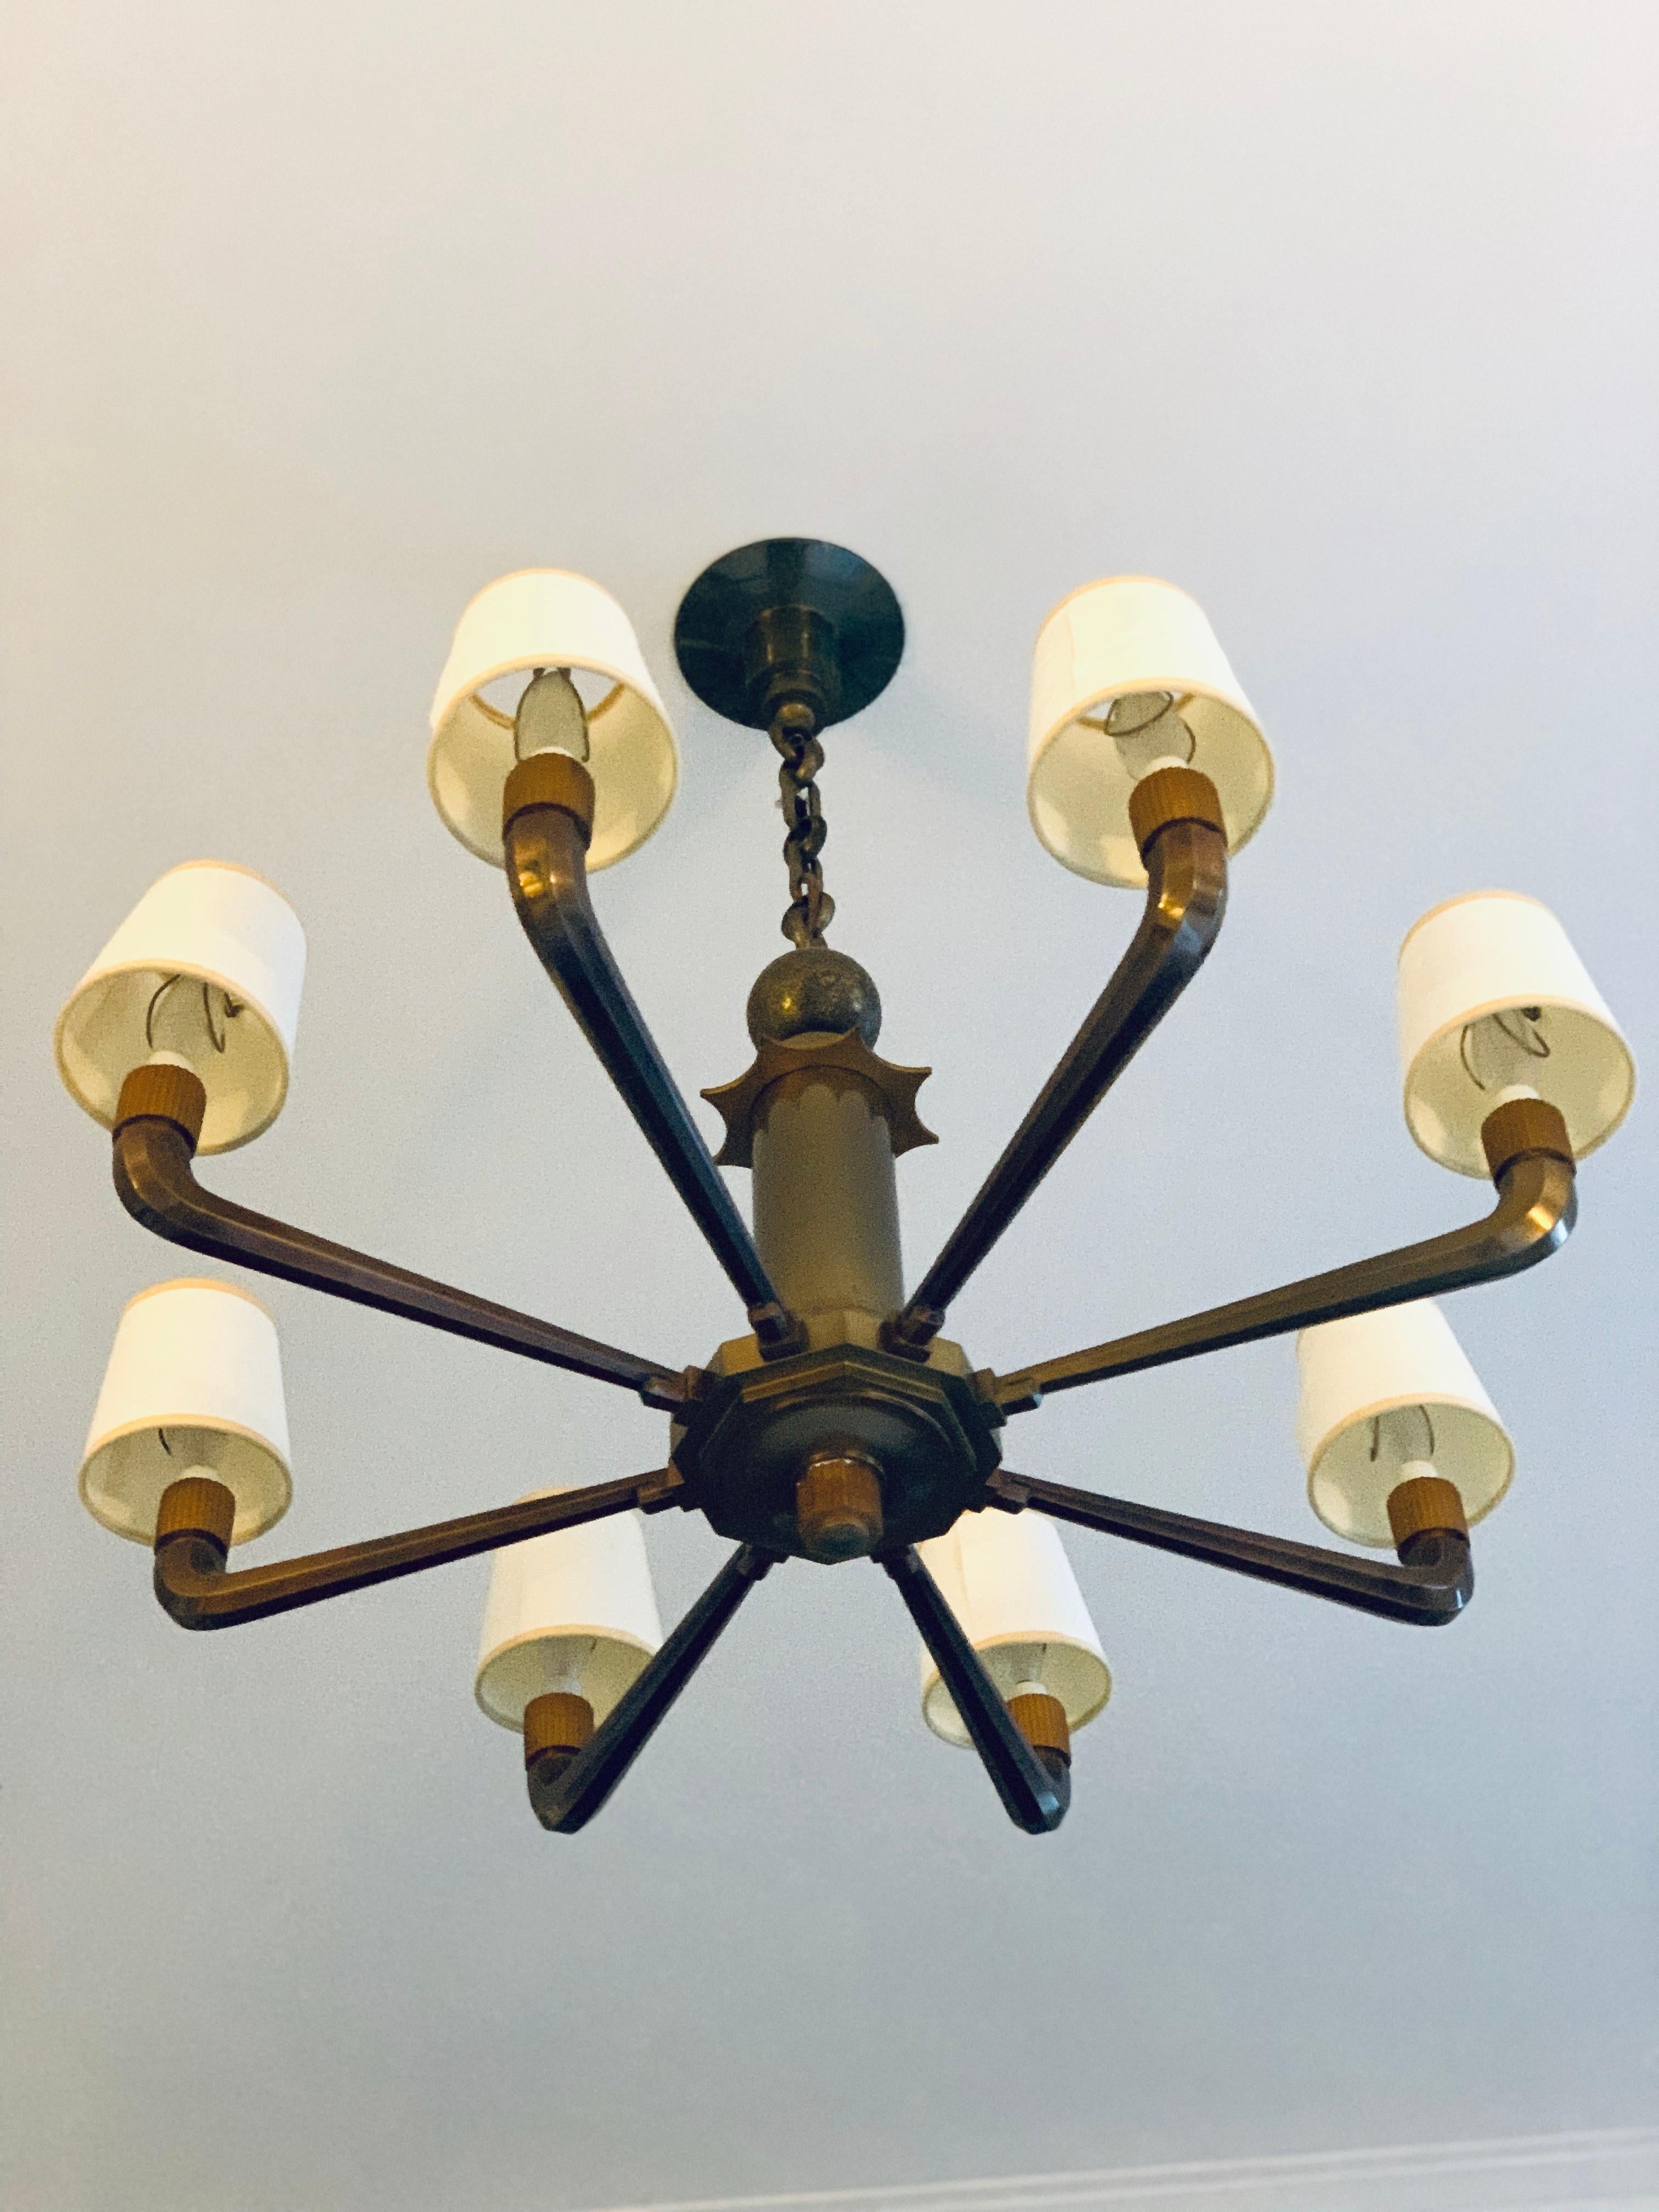 This light came out of a bank in France and is probably early 1920s-1930s. A solid bronze stem leads up to a star and ball detail. This chandelier is solid brass and quite heavy. A very special piece. Looks equally handsome with or without shades.